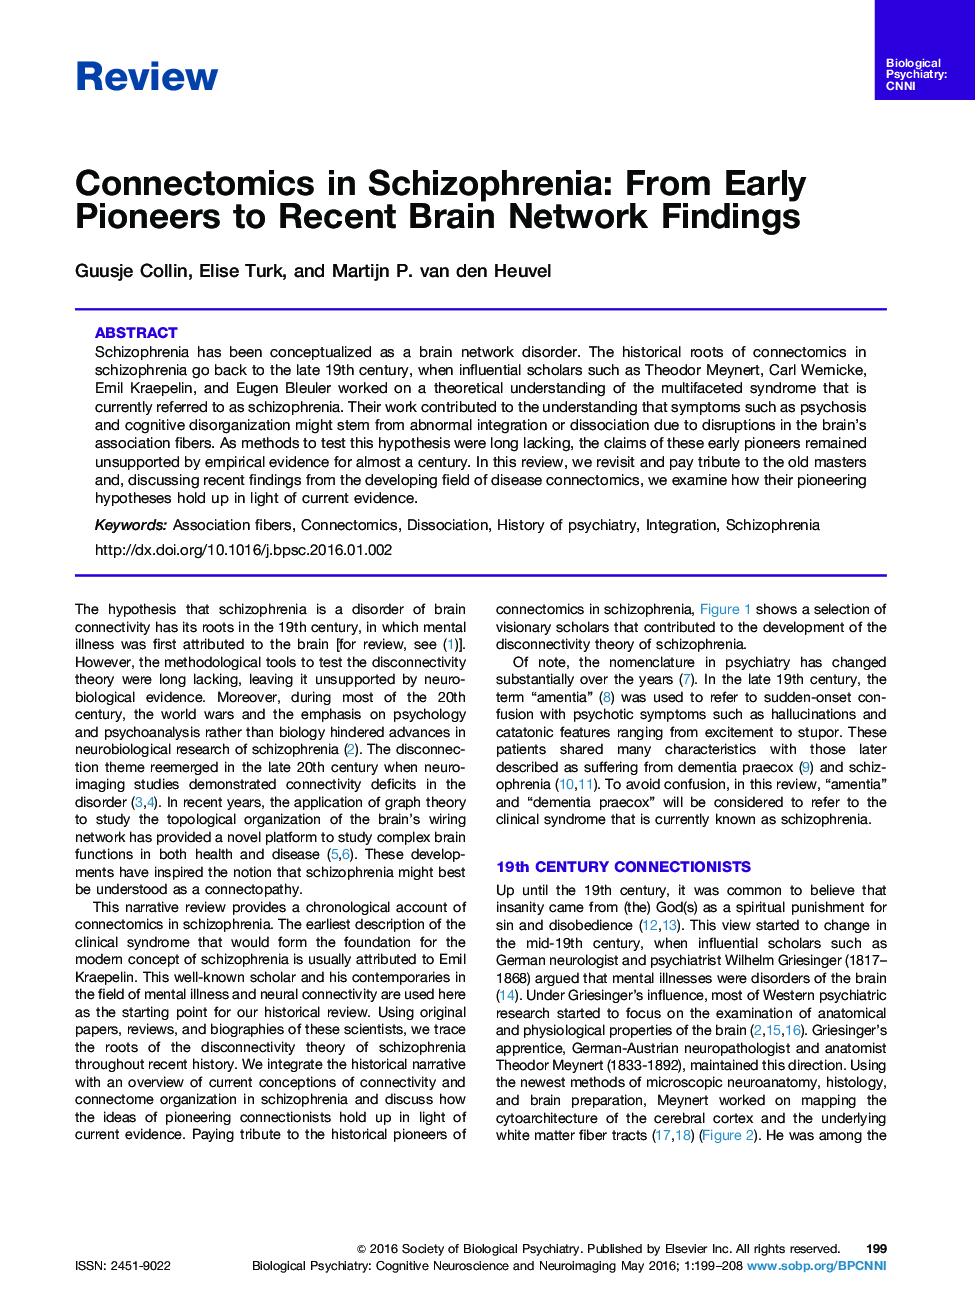 Connectomics in Schizophrenia: From Early Pioneers to Recent Brain Network Findings